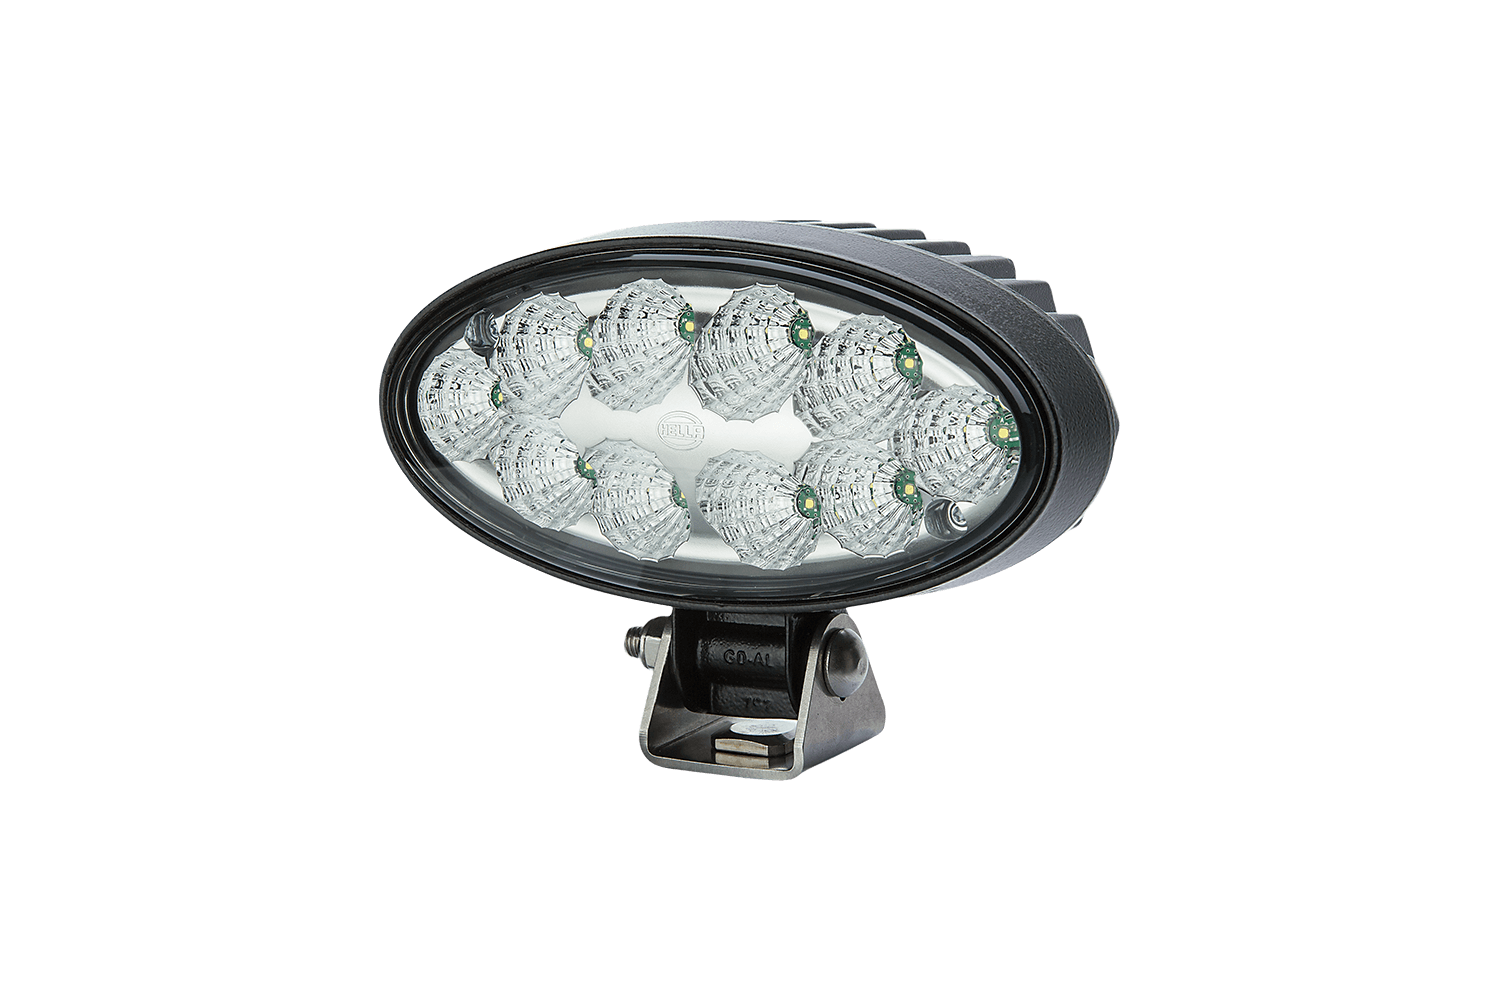 Oval 90 LED Generation 1 work lamps from Hella offered by Patlon